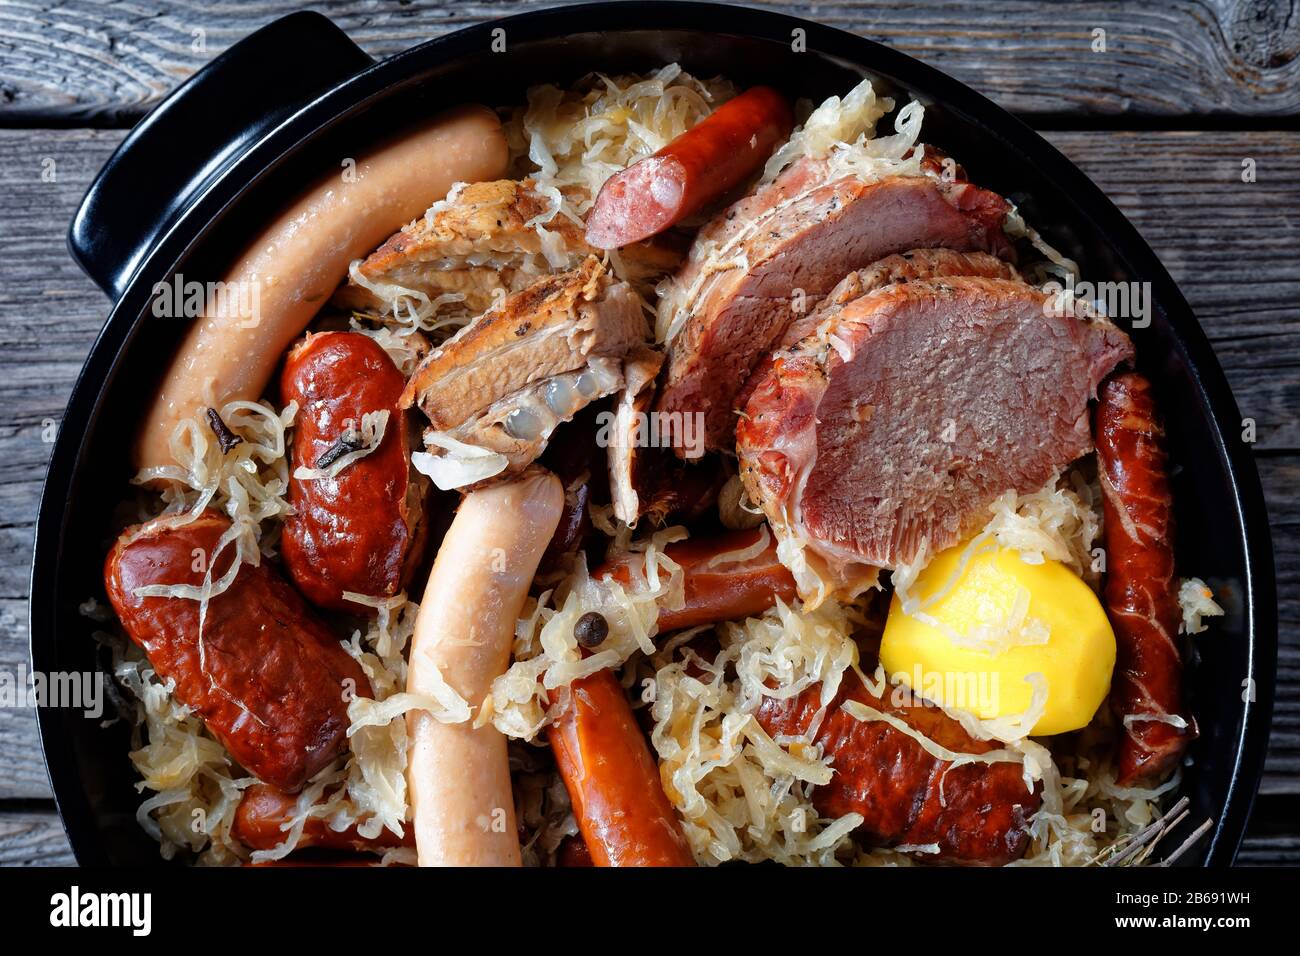 Sour cabbage stew with different types of meat and sausages and potato stewed in white wine with onion thyme juniper berries, garlic served on a black Stock Photo